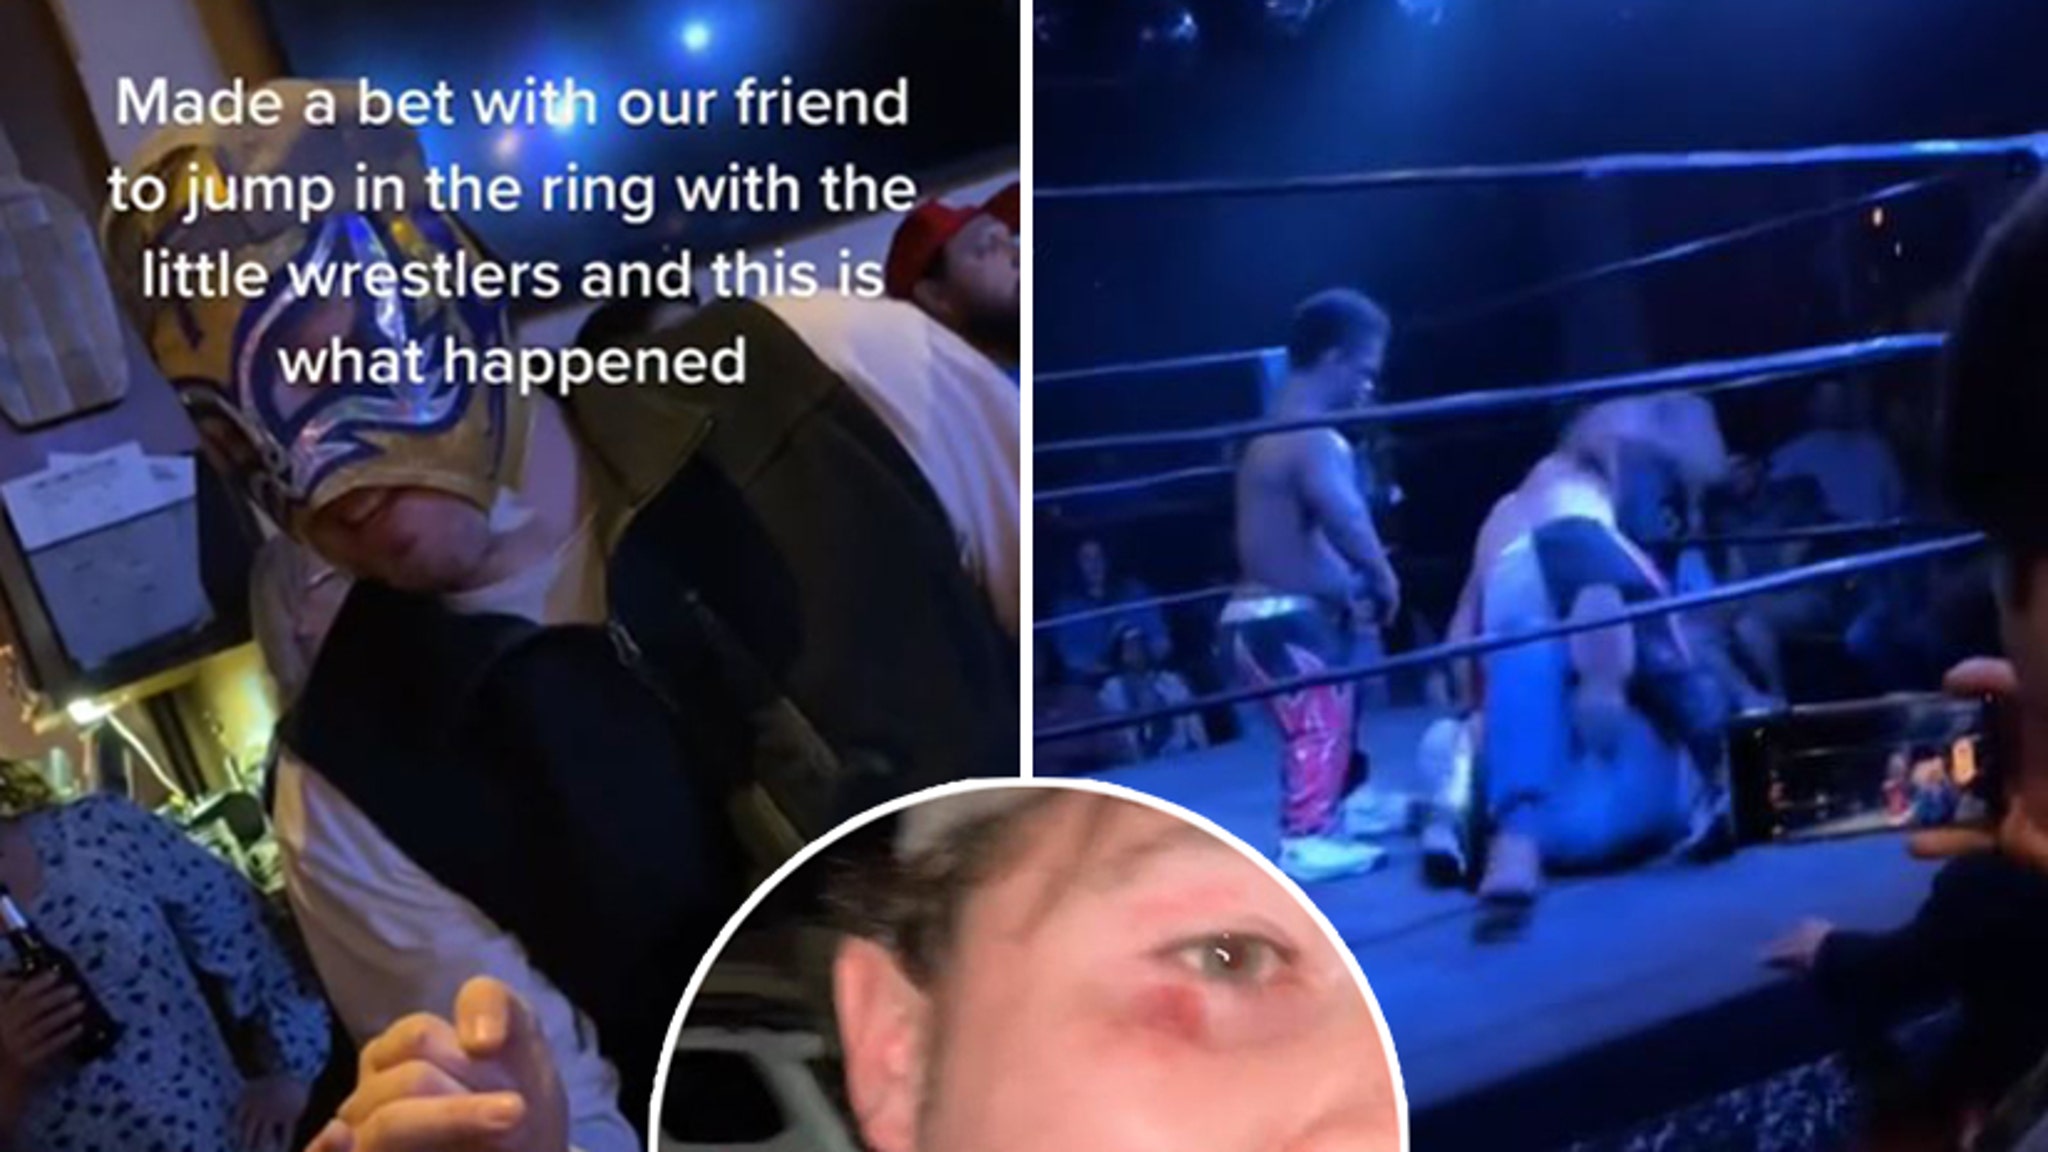 Fan Makes Bet to Jump in Ring With Little Wrestlers, Instantly Regrets It.